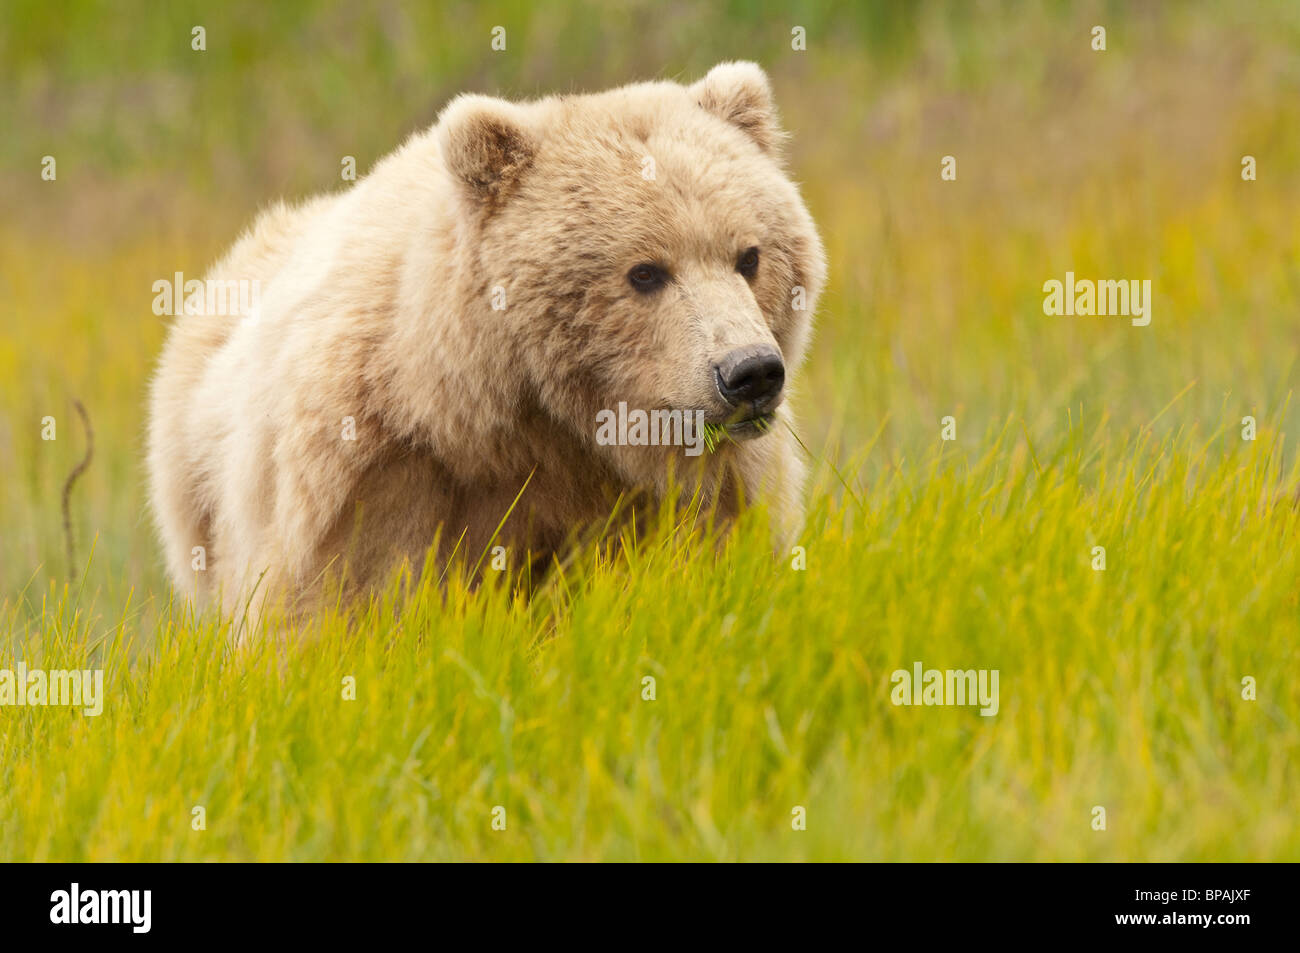 Stock photo of an Alaskan blonde-phase brown bear in a meadow of golden grasses. Stock Photo